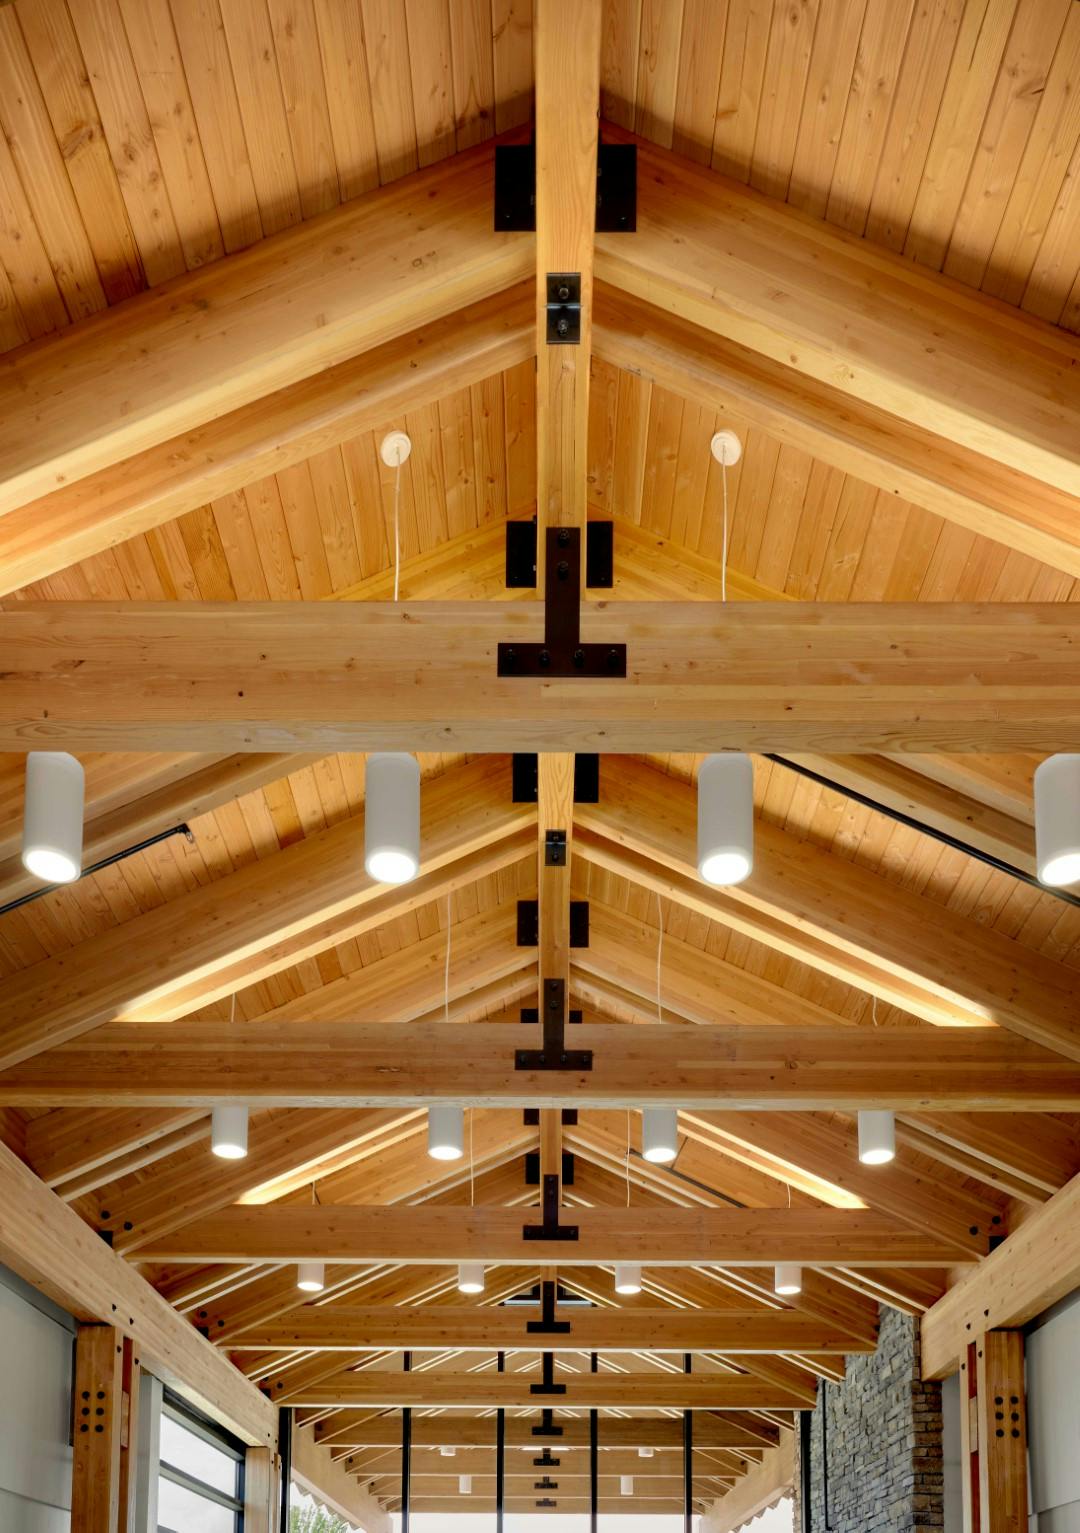 Vaulted ceilings in the entryway of the OOC ambulatory surgery center. The ceiling is composed of exposed wood and large glulam beams. 